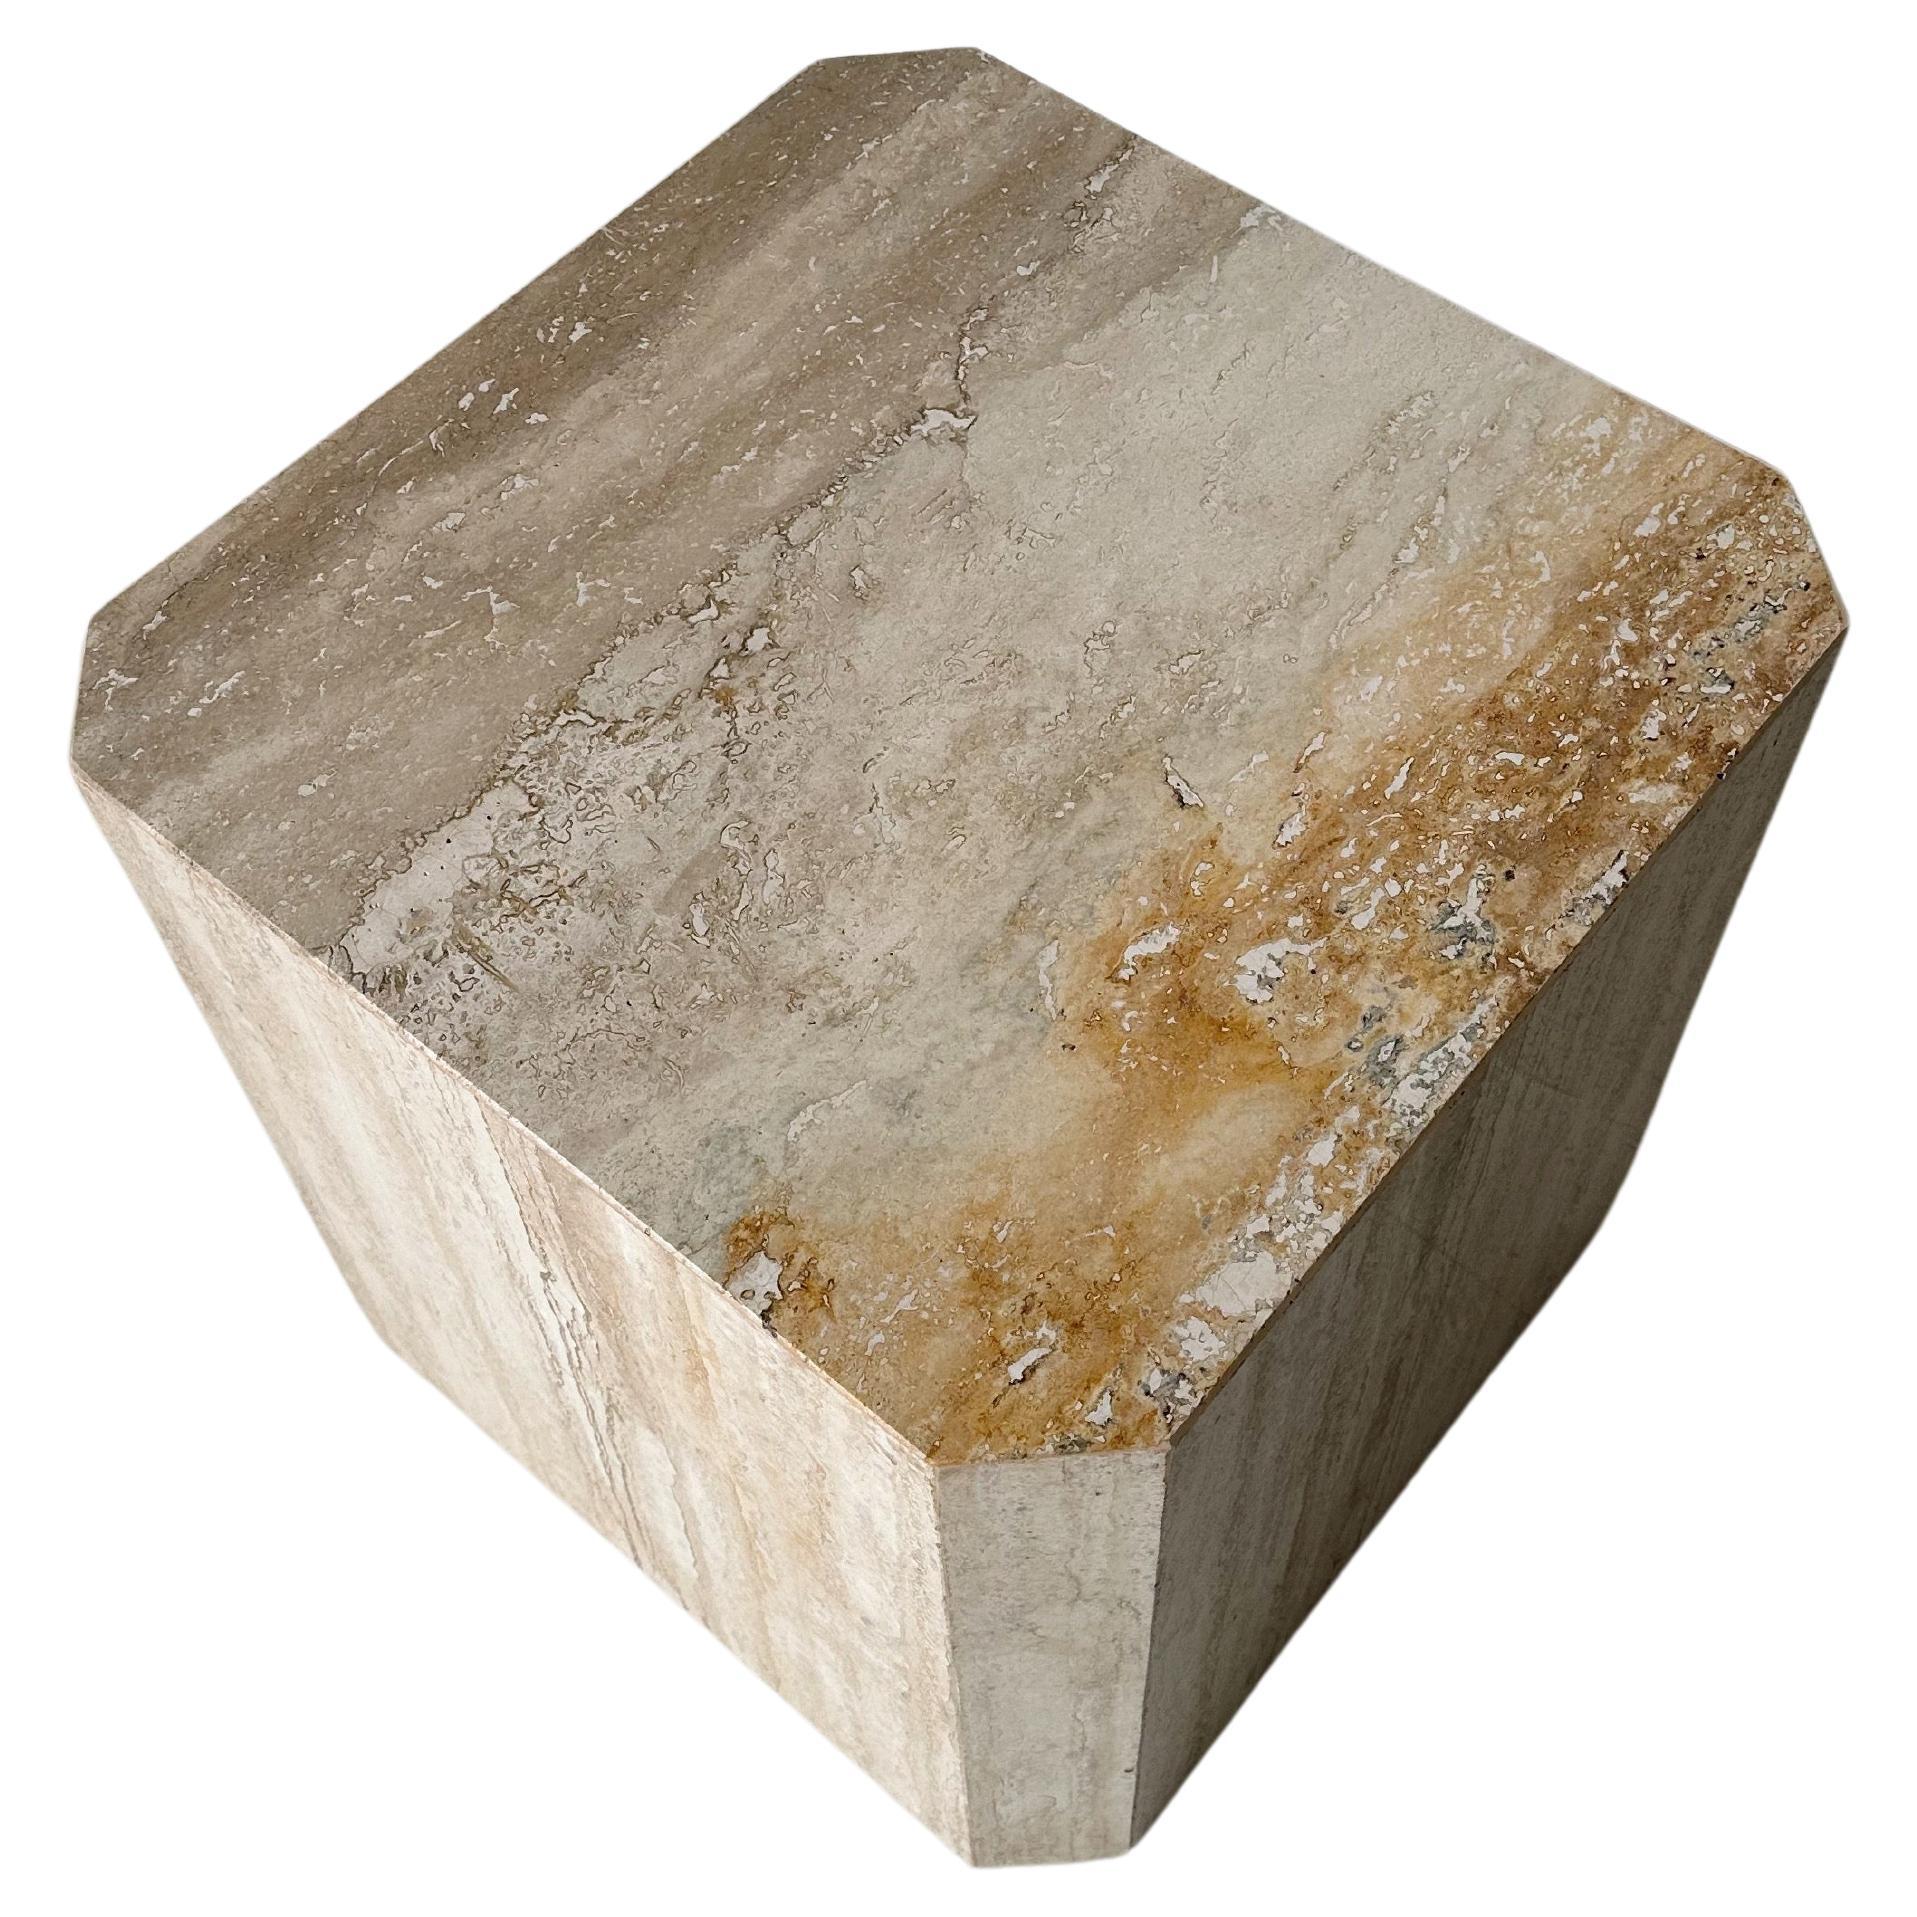 Travertine Cube Side Table